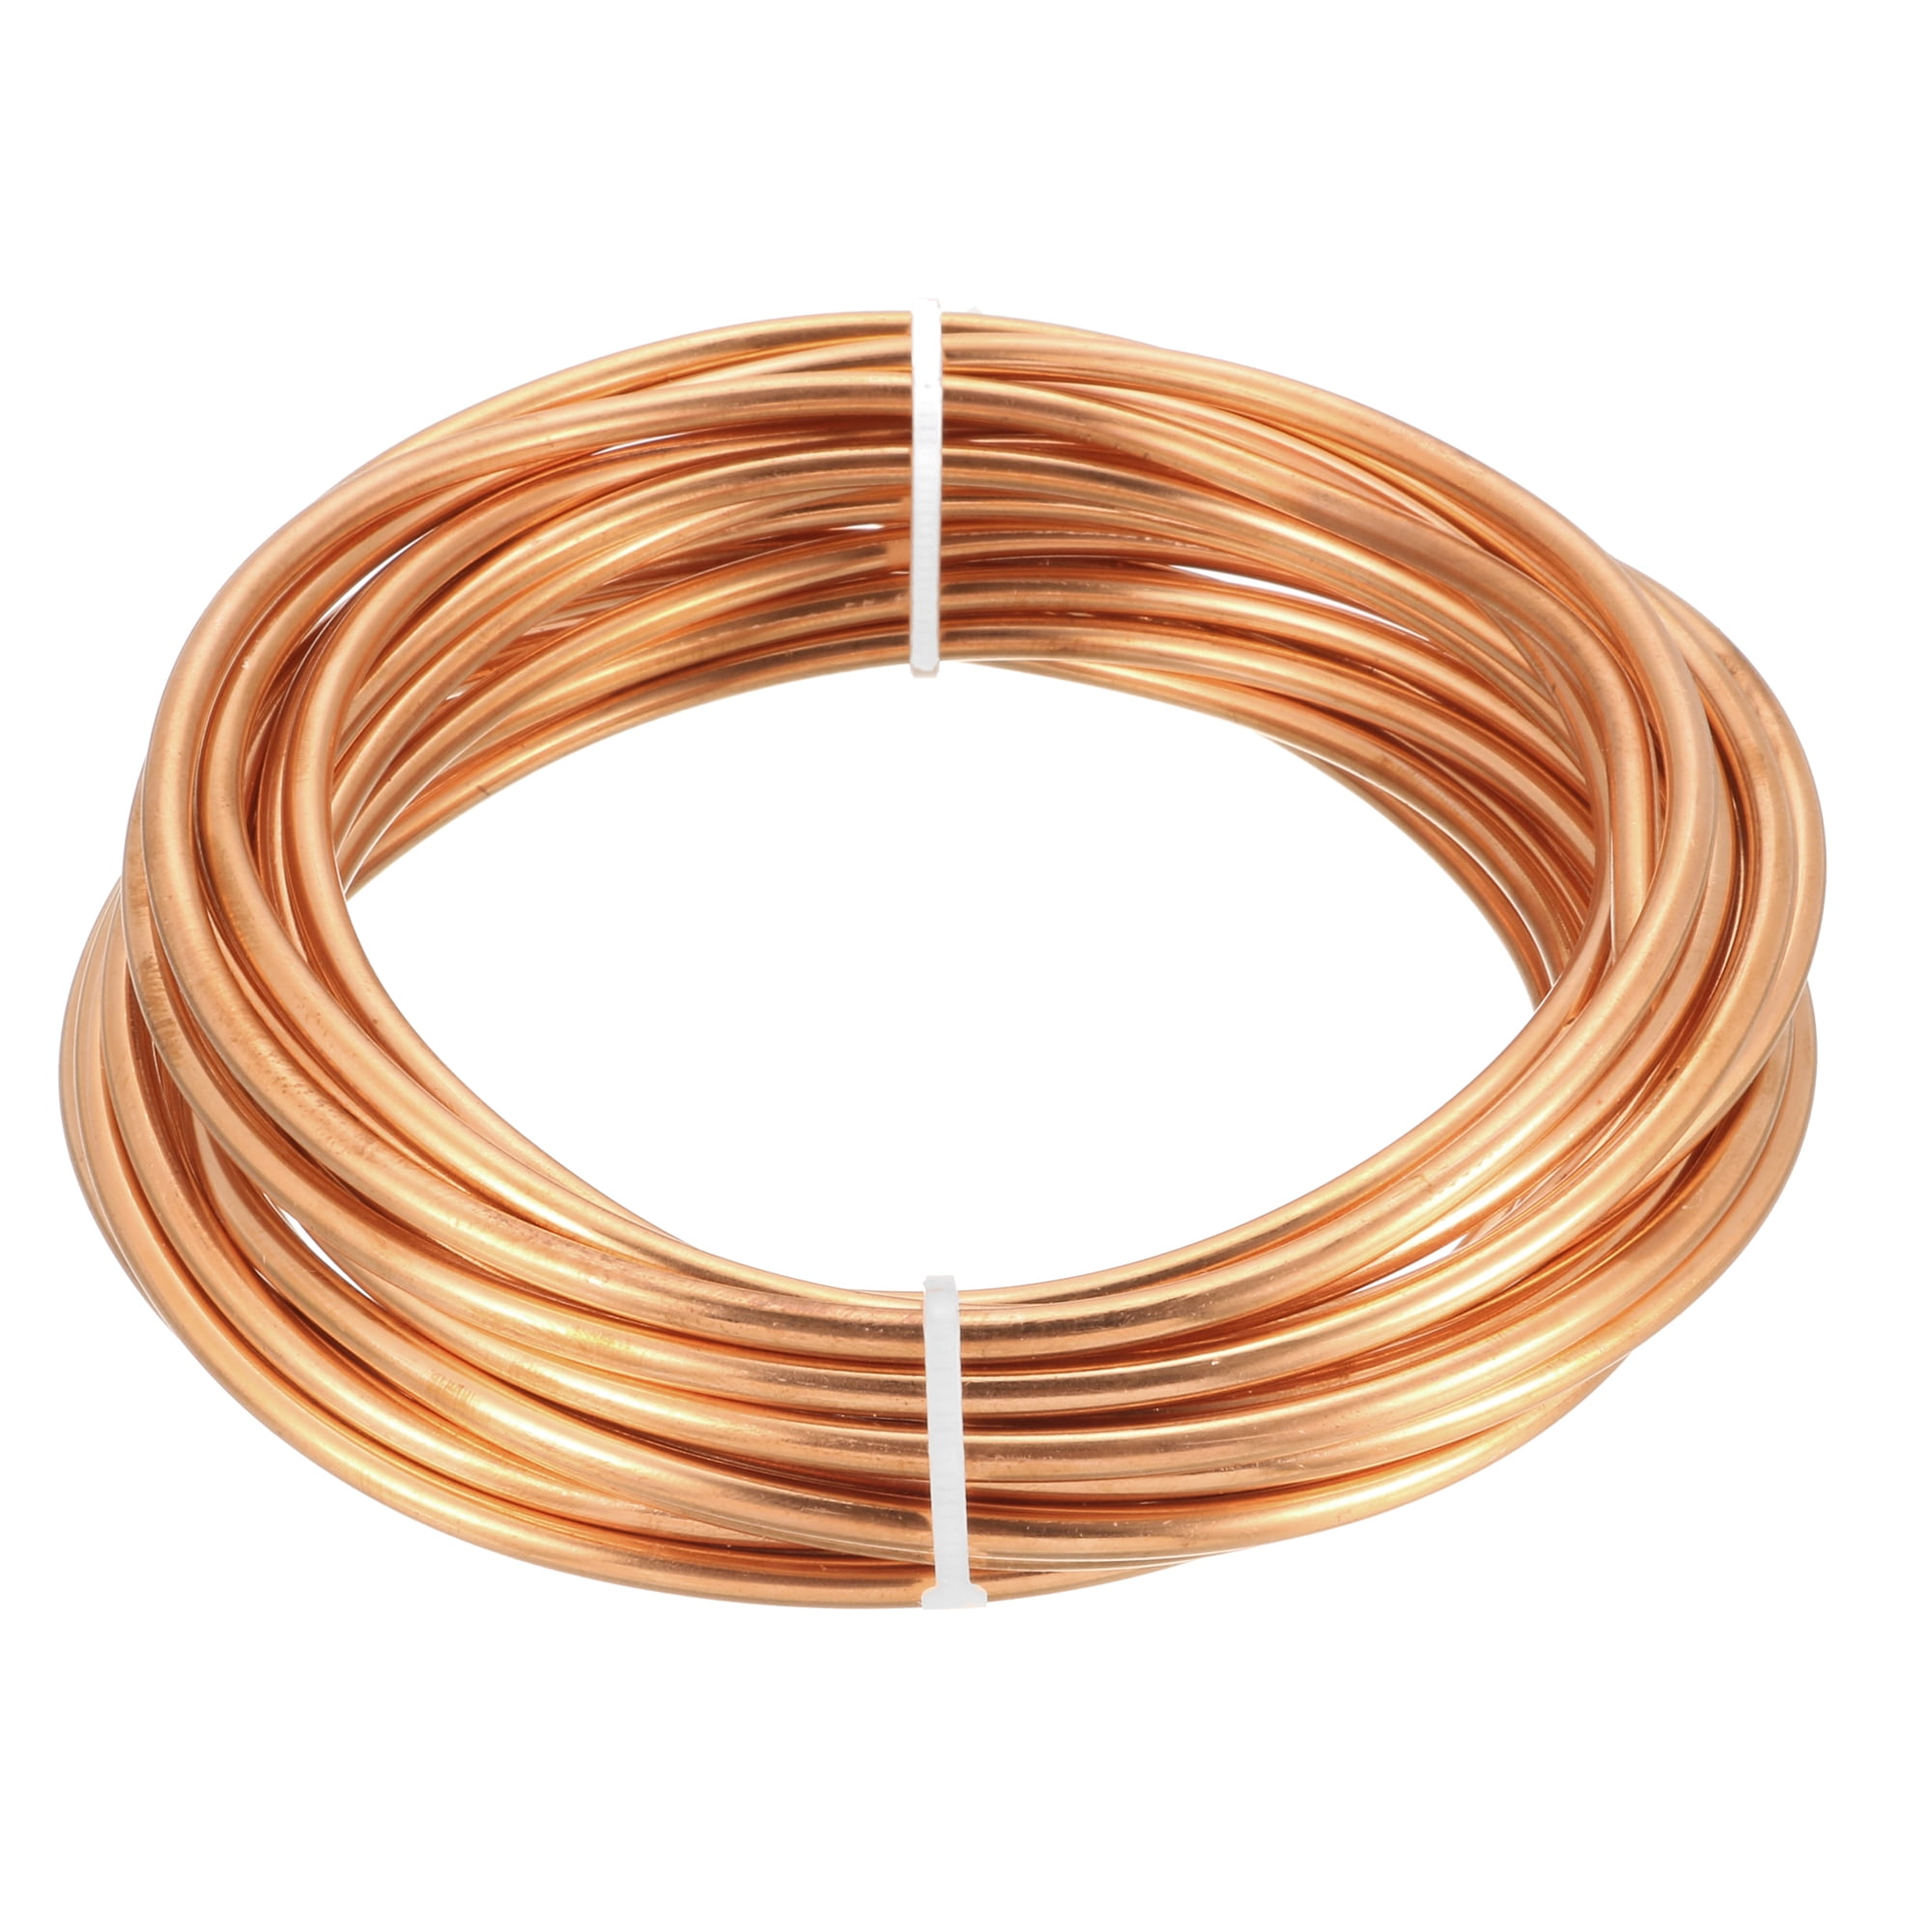 uxcell Refrigeration Tubing 5mm OD x 4mm ID x 19.5Ft Length Copper Tubing Coil 